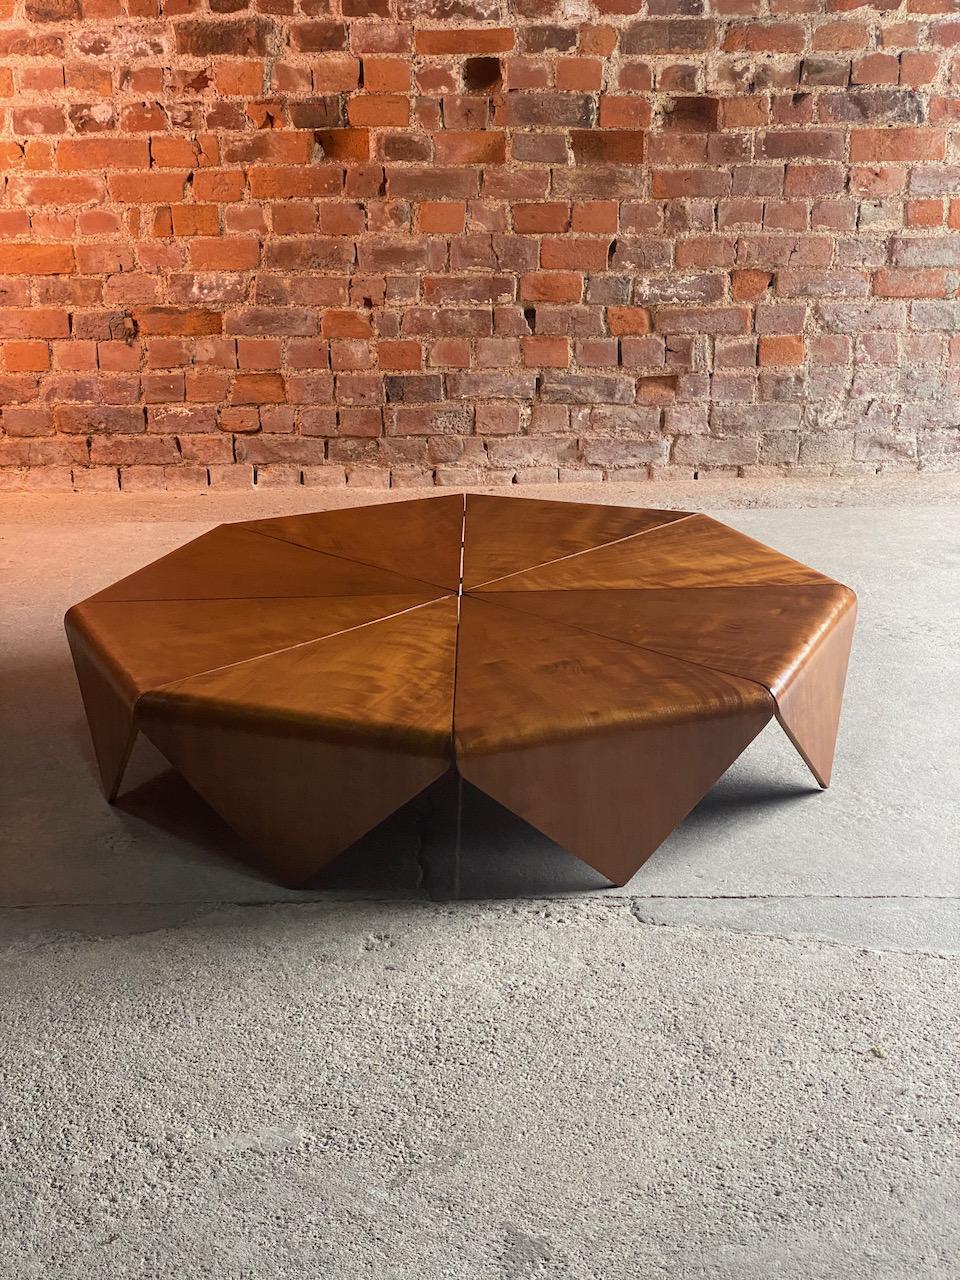 Jorge Zalszupin petalas Imbuia coffee table by L' Atelier, circa 1960.

Stunning Jorge Zalszupin ‘Petalas' Brazilian Walnut Imbuia coffee table manufactured by L' Atelier circa 1960, the octagonal Petalas coffee table was inspired by the folded